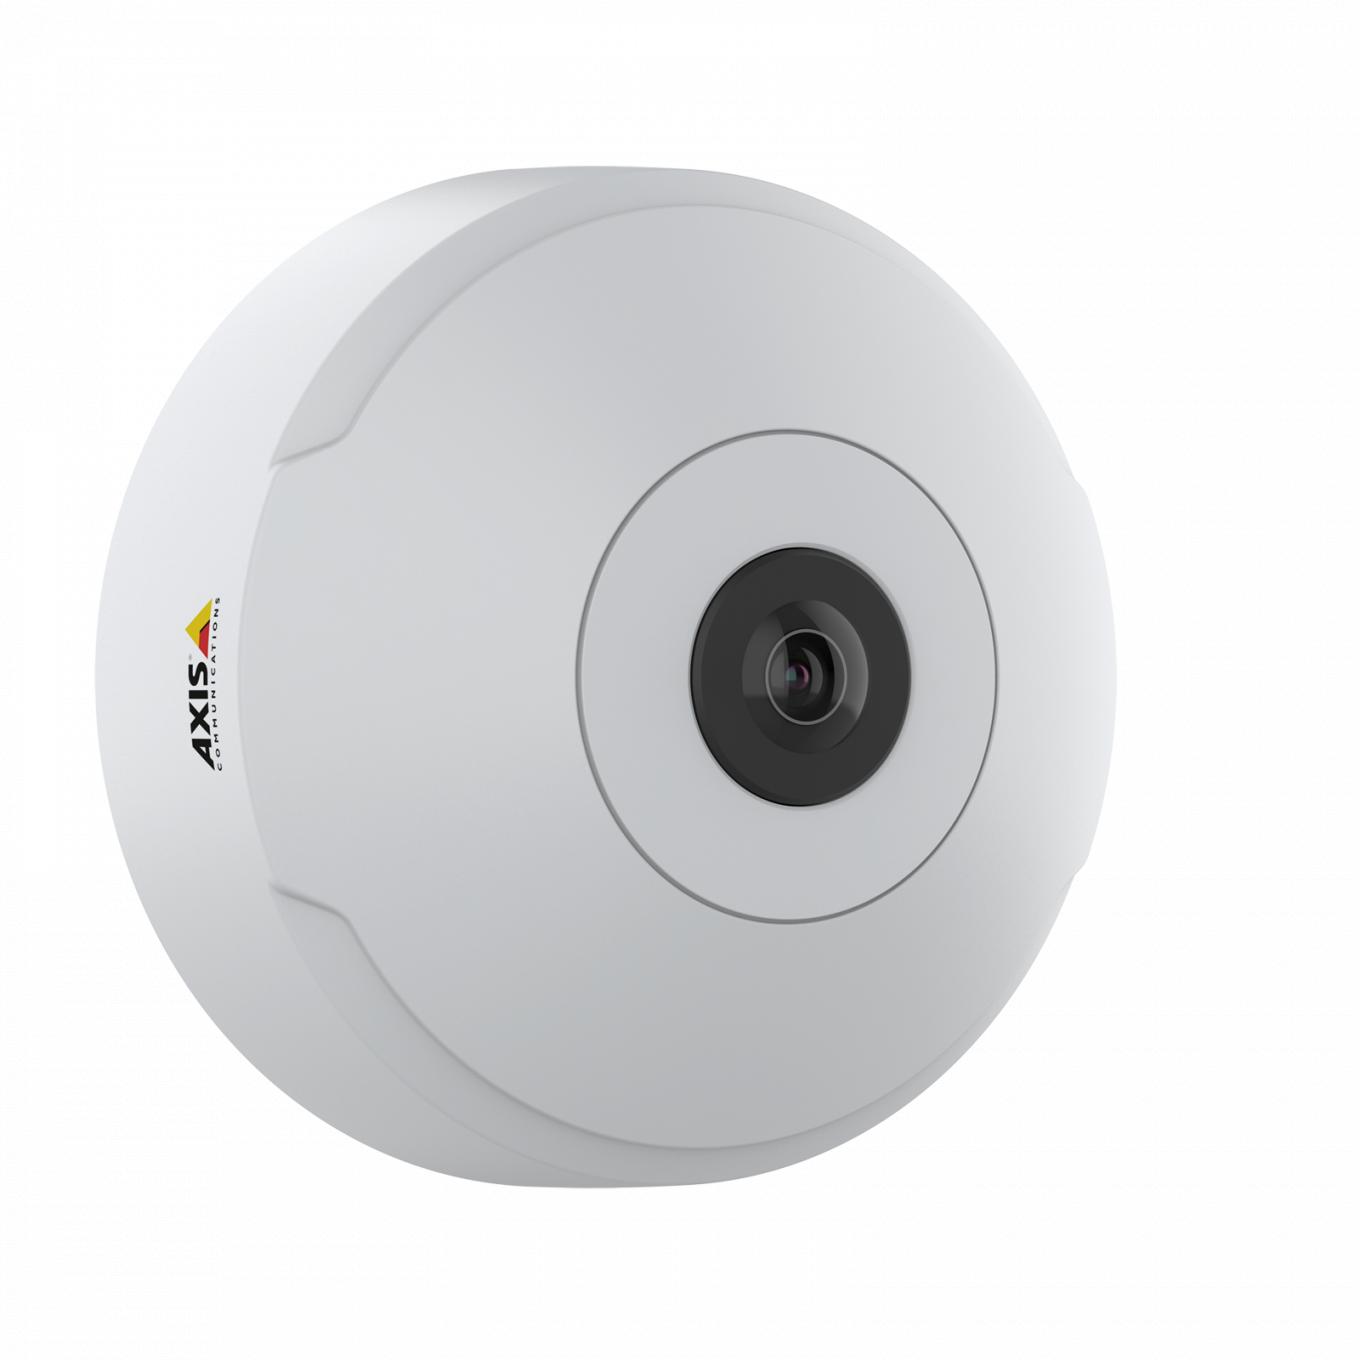 AXIS M3067-P IP camera from right angle